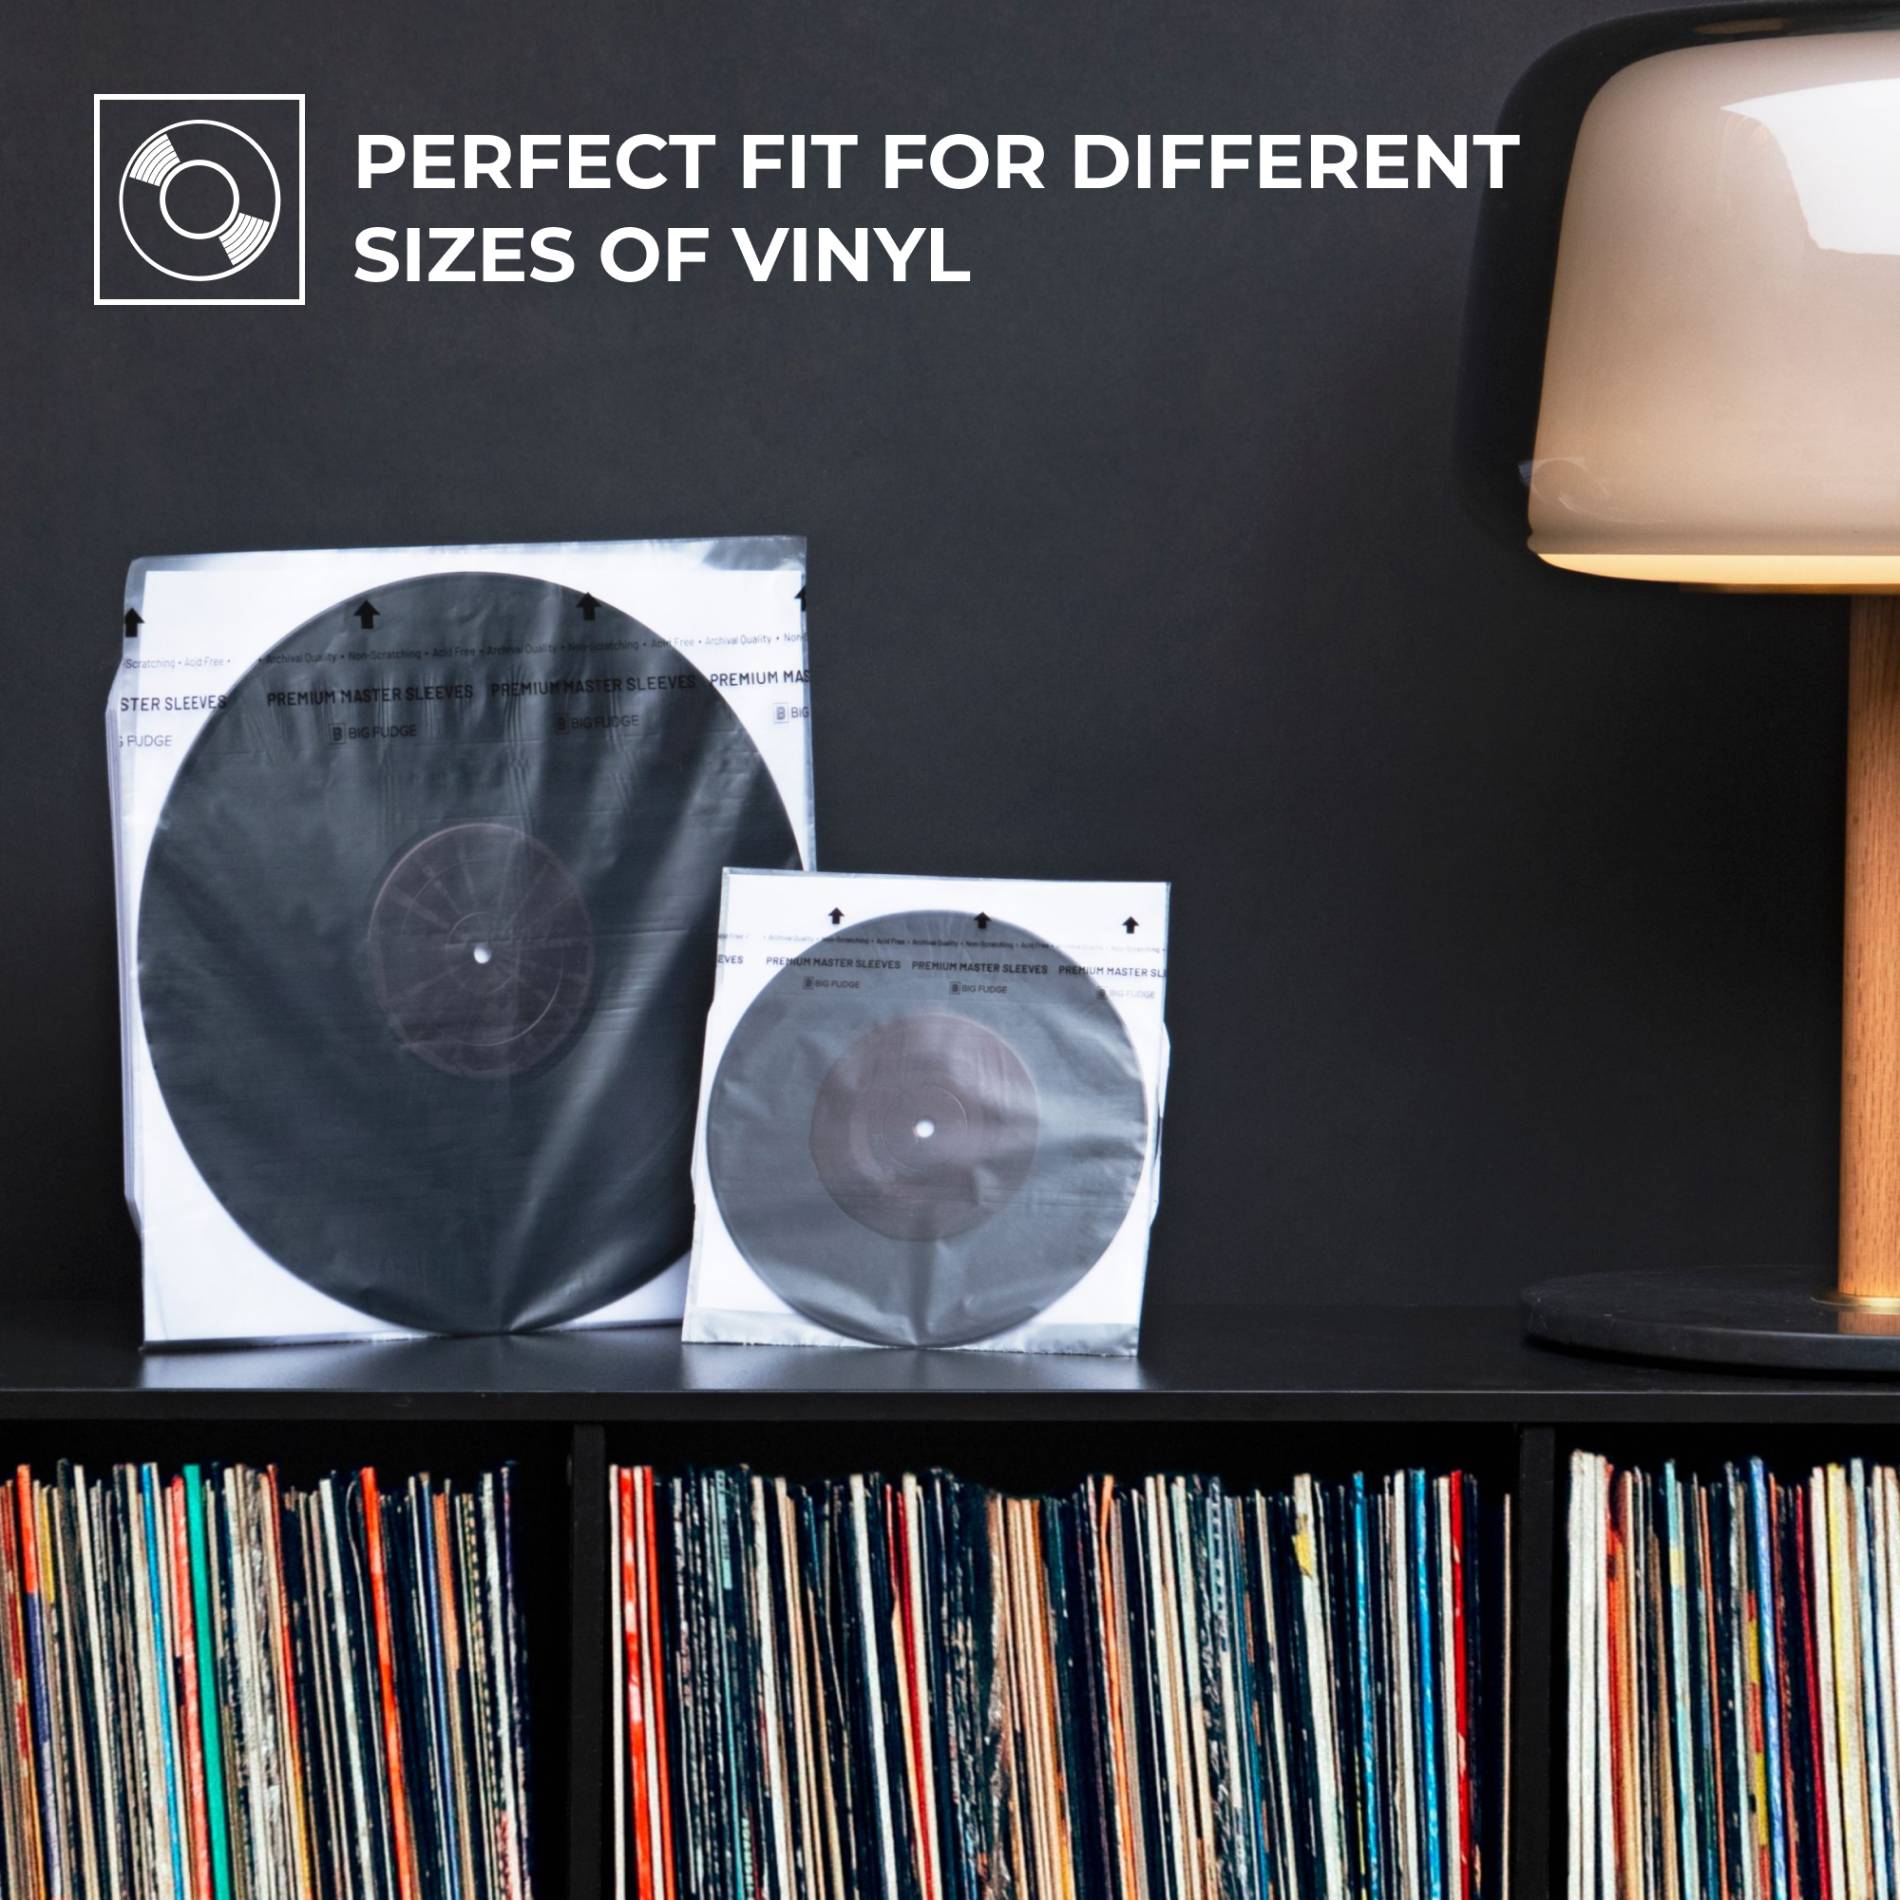 Perfect fit for different sizes of vinyl